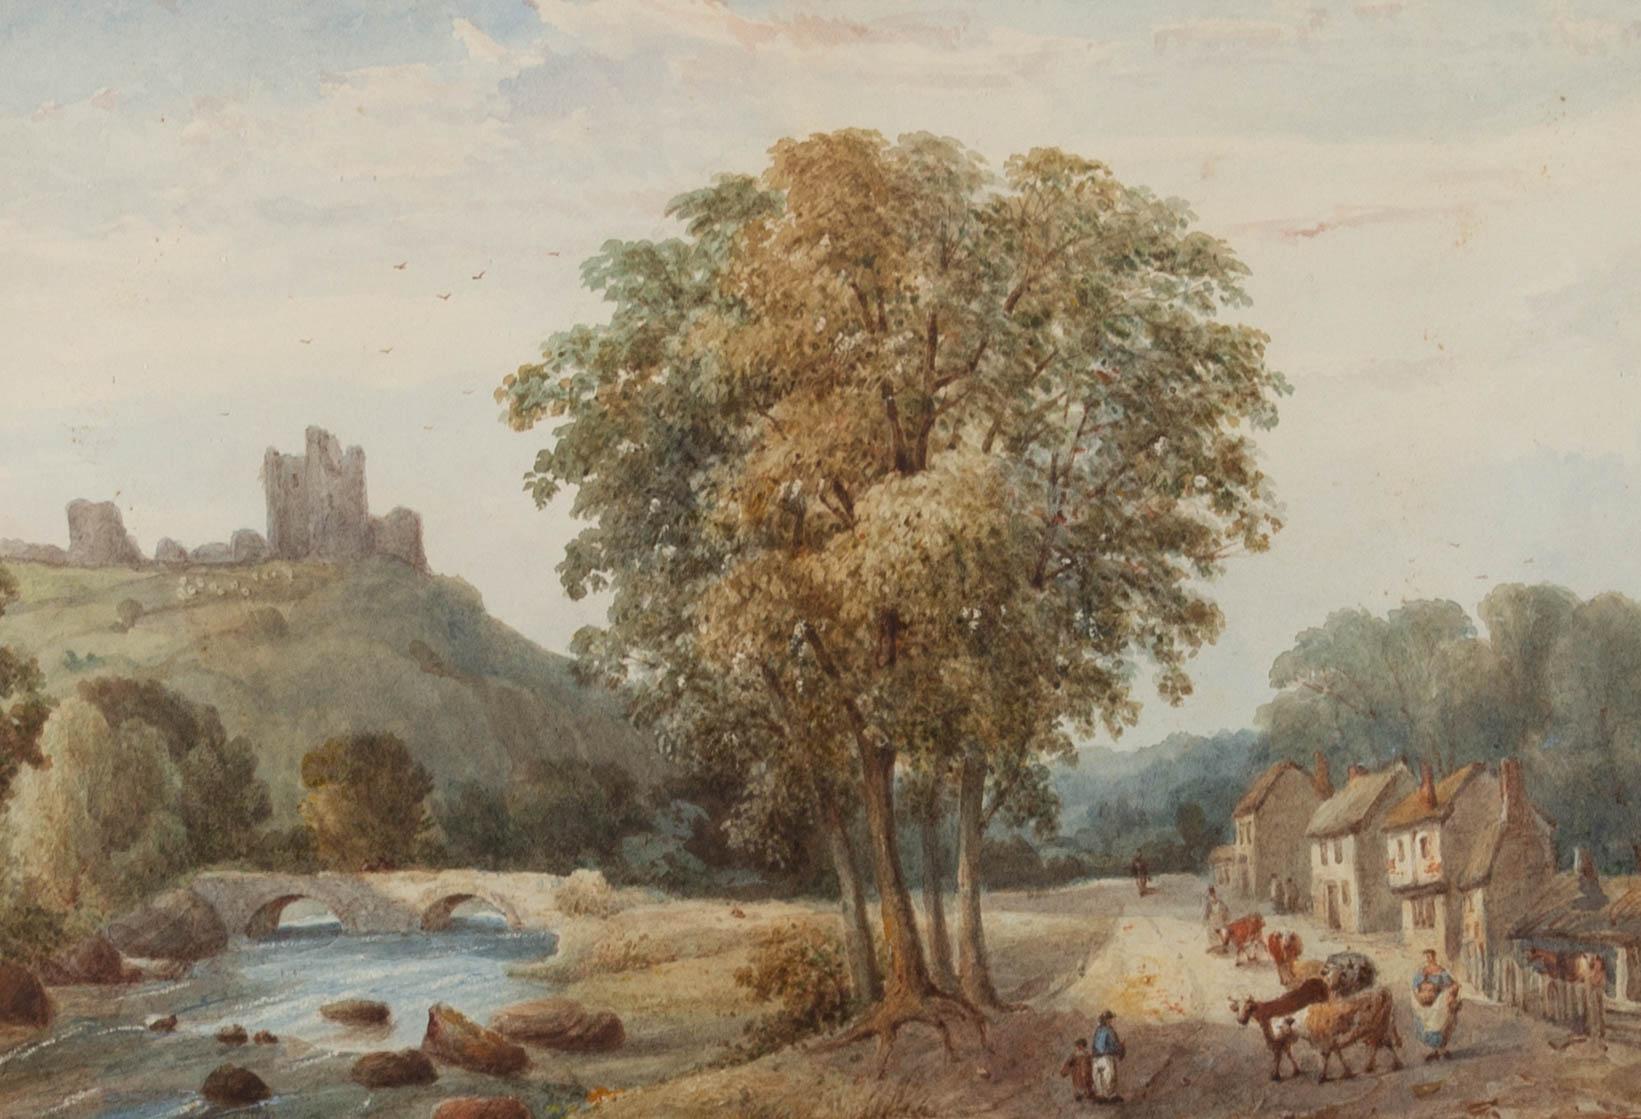 A charming watercolour depicting a village by a river. A ruined castle is perched on the hill in the distance, sheltering a flock of grazing sheep on the hillside. Cattle and figures walk along the street in the foreground. Presented glazed in a